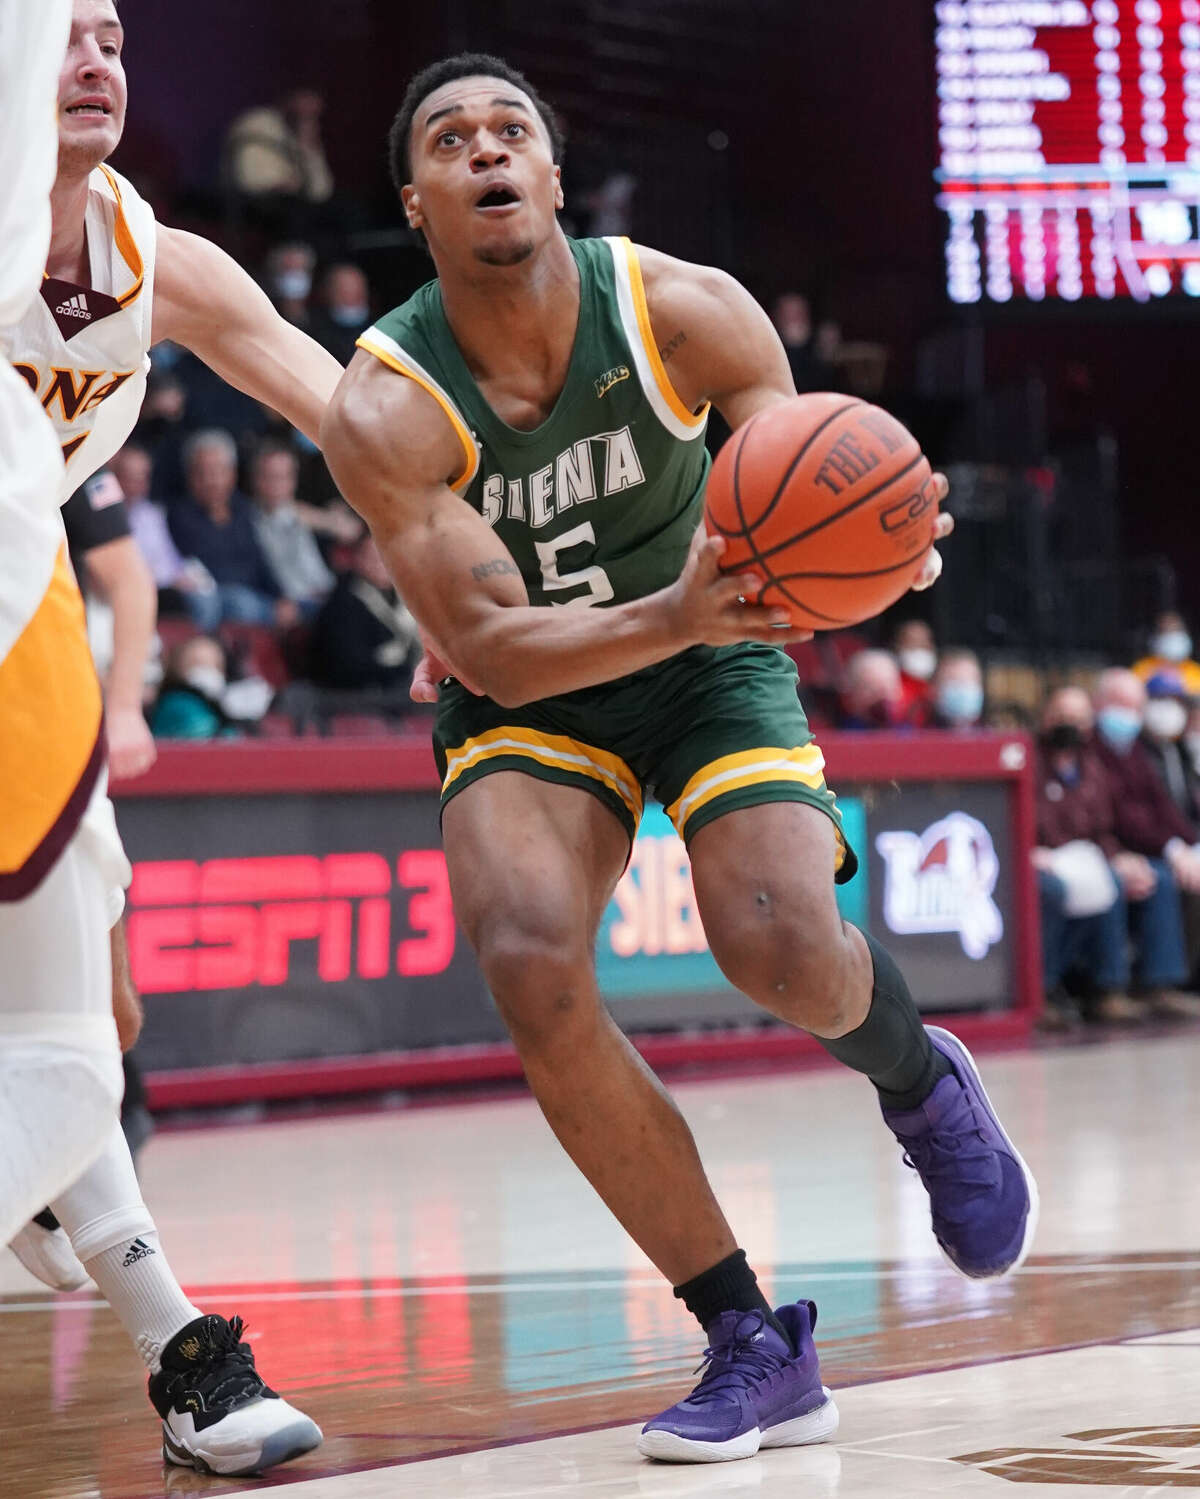 Siena senior guard Jayce Johnson had six points and a team-high eight rebounds in a loss at Iona on Jan. 25, 2022.